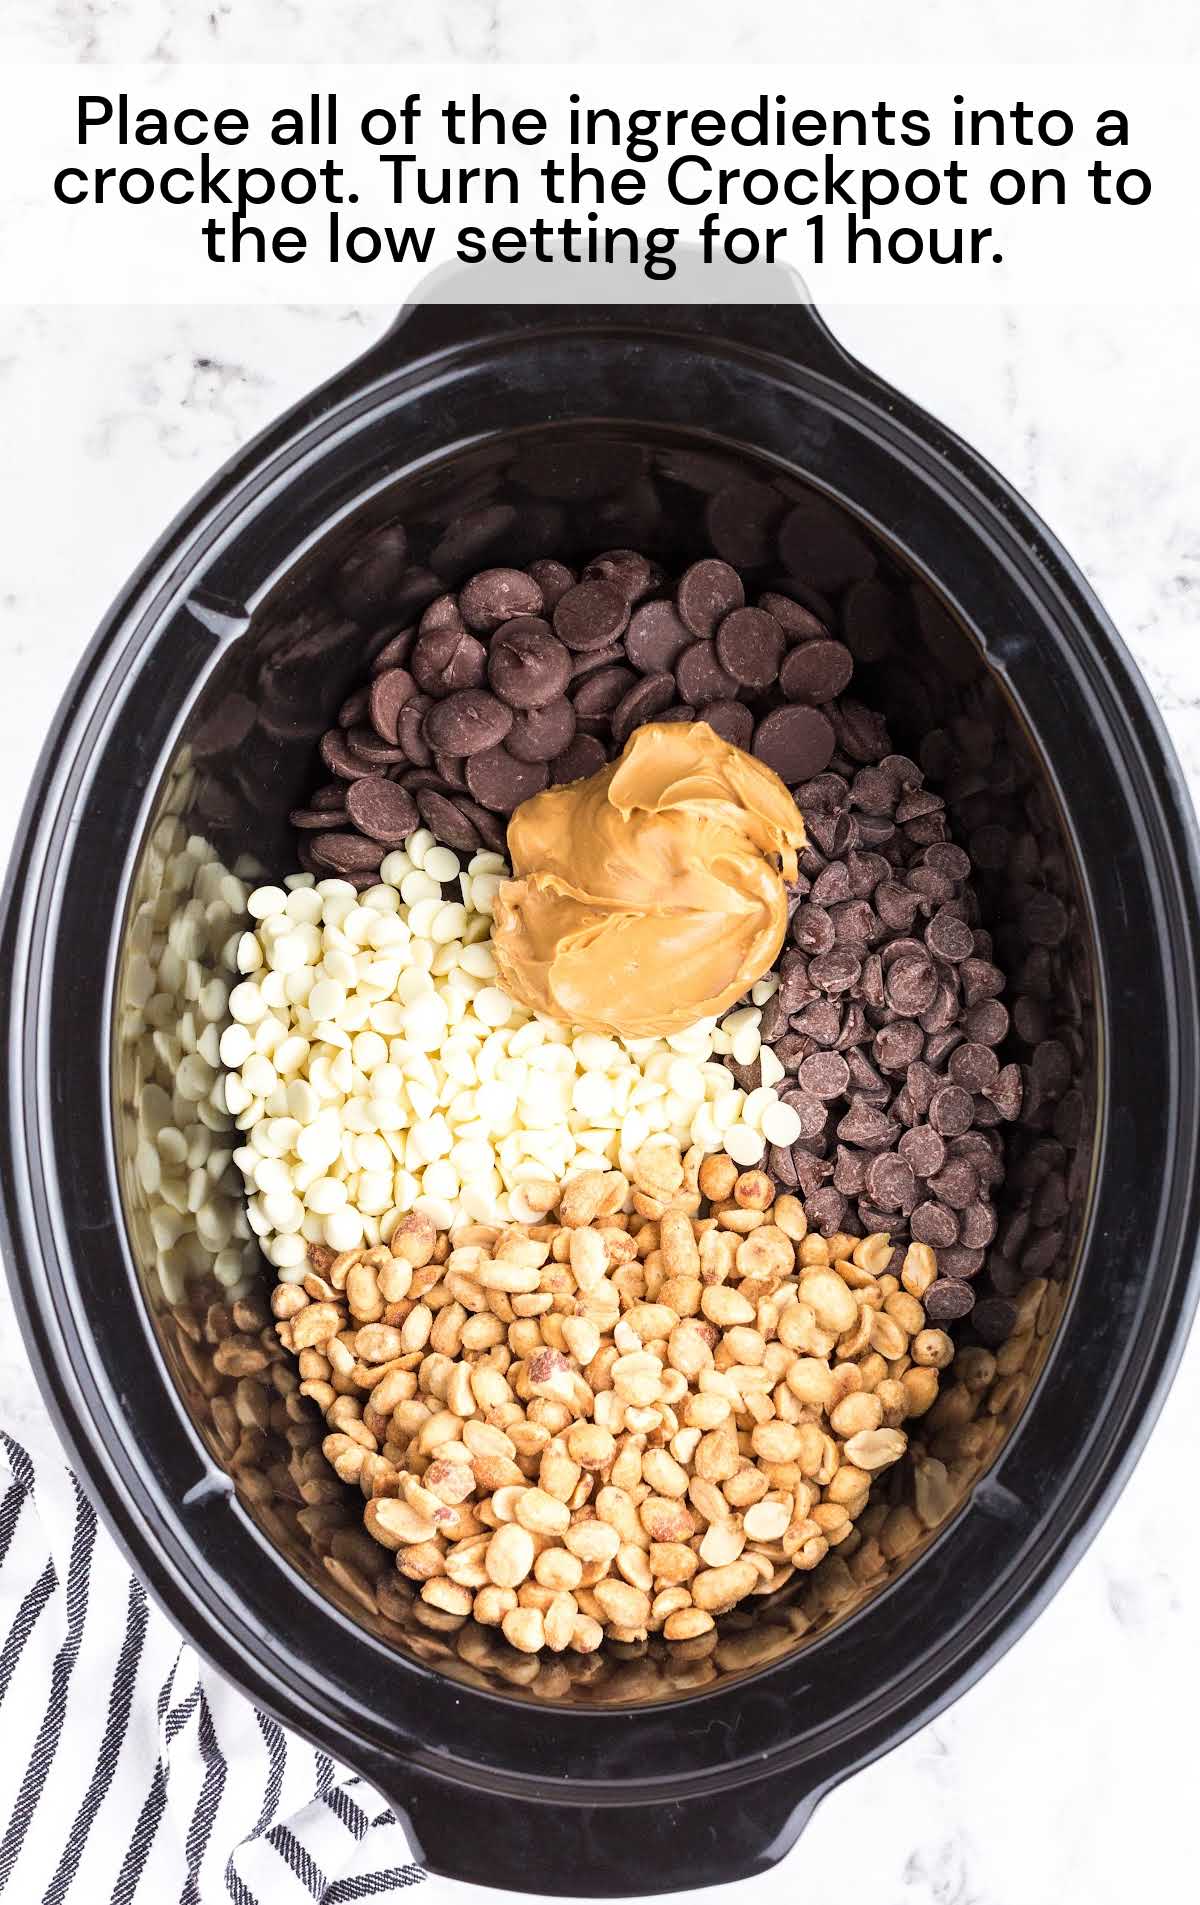 ingredients placed in a crock pot